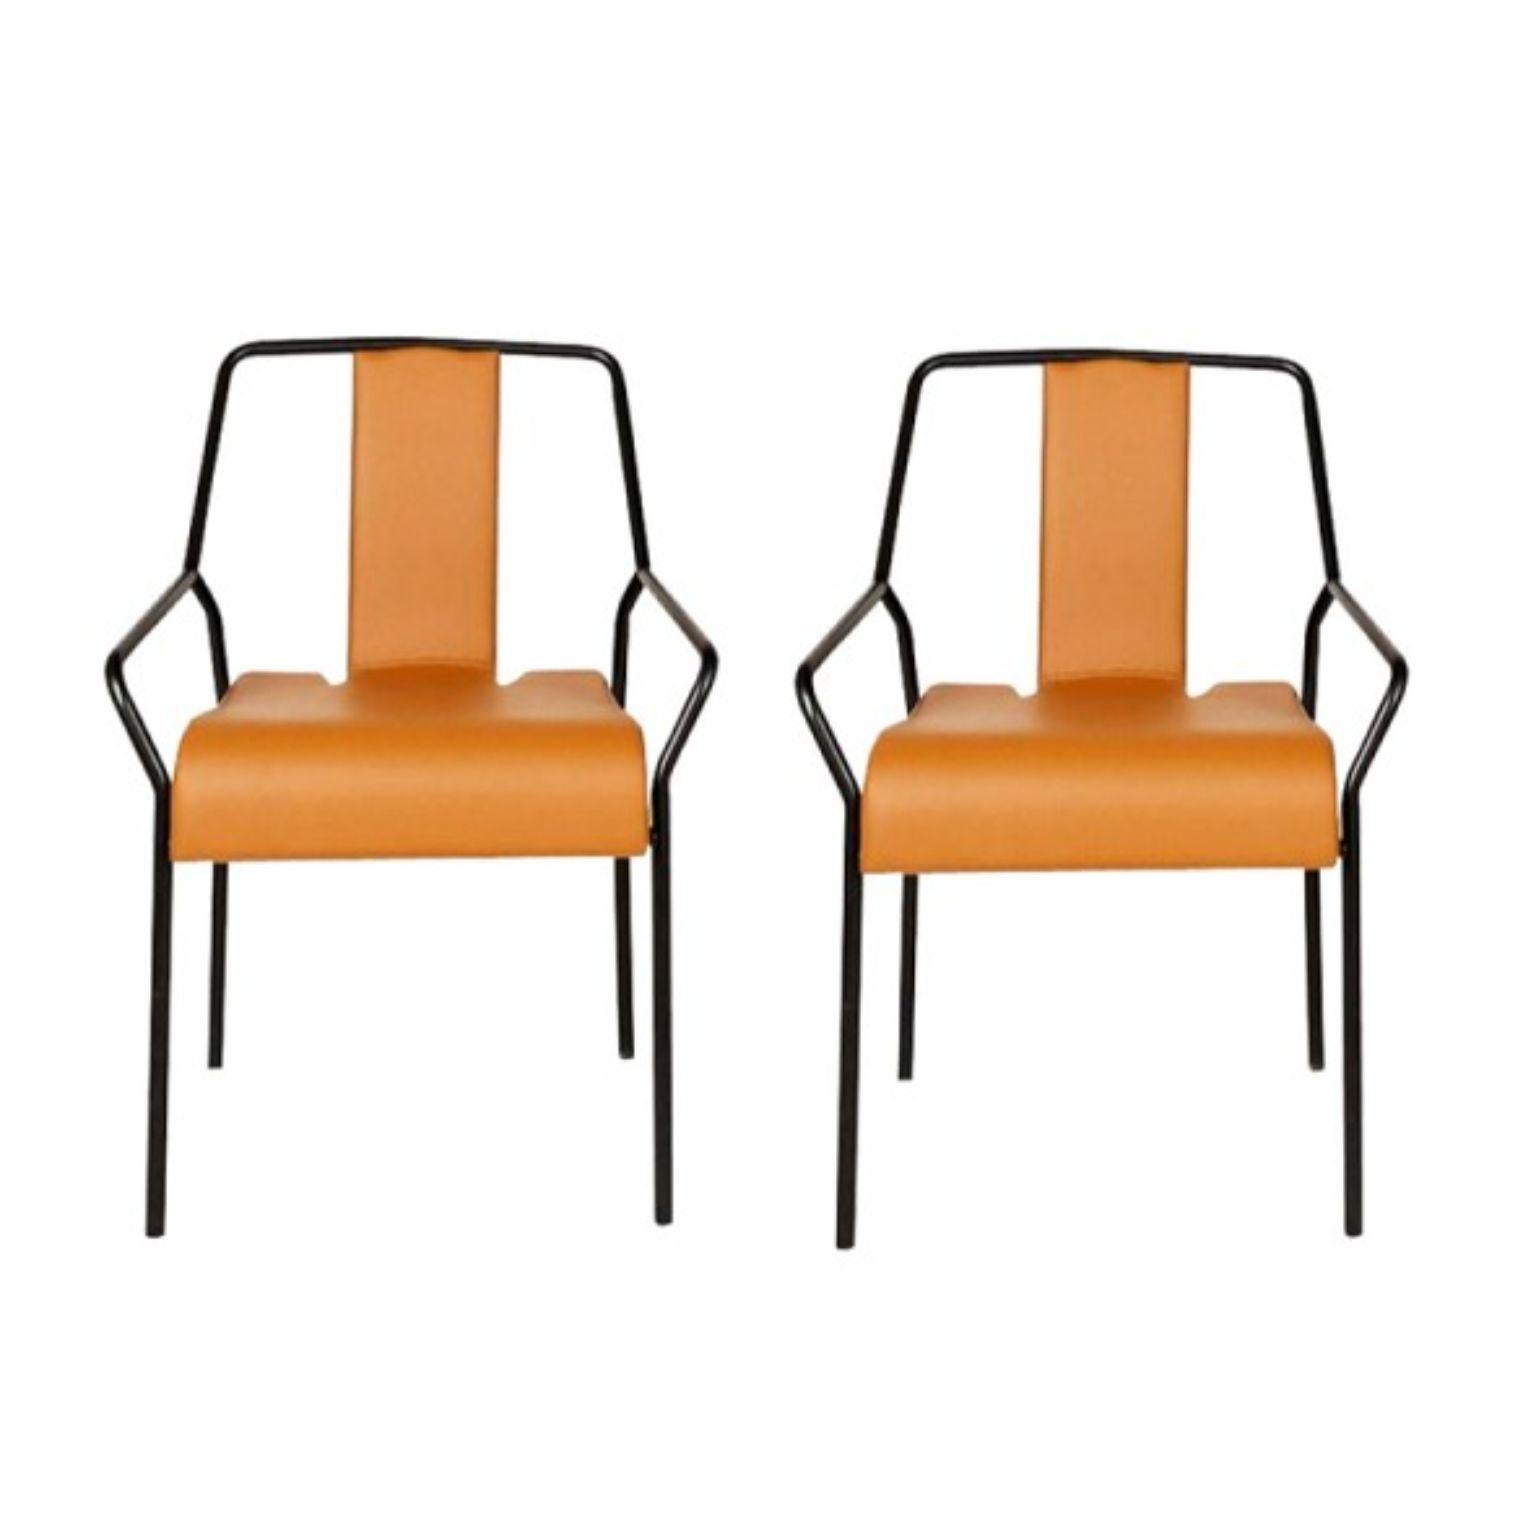 Set of 2 upholstered DAO chairs by Shin Azumi
Materials: stackable chair, black or white lacquered metal frame. Seat covered in imitation leather
Technique: Lacquered metal, natural and stained wood. Faux leather. 
Dimensions: W 56 x D 50.1 x H 80